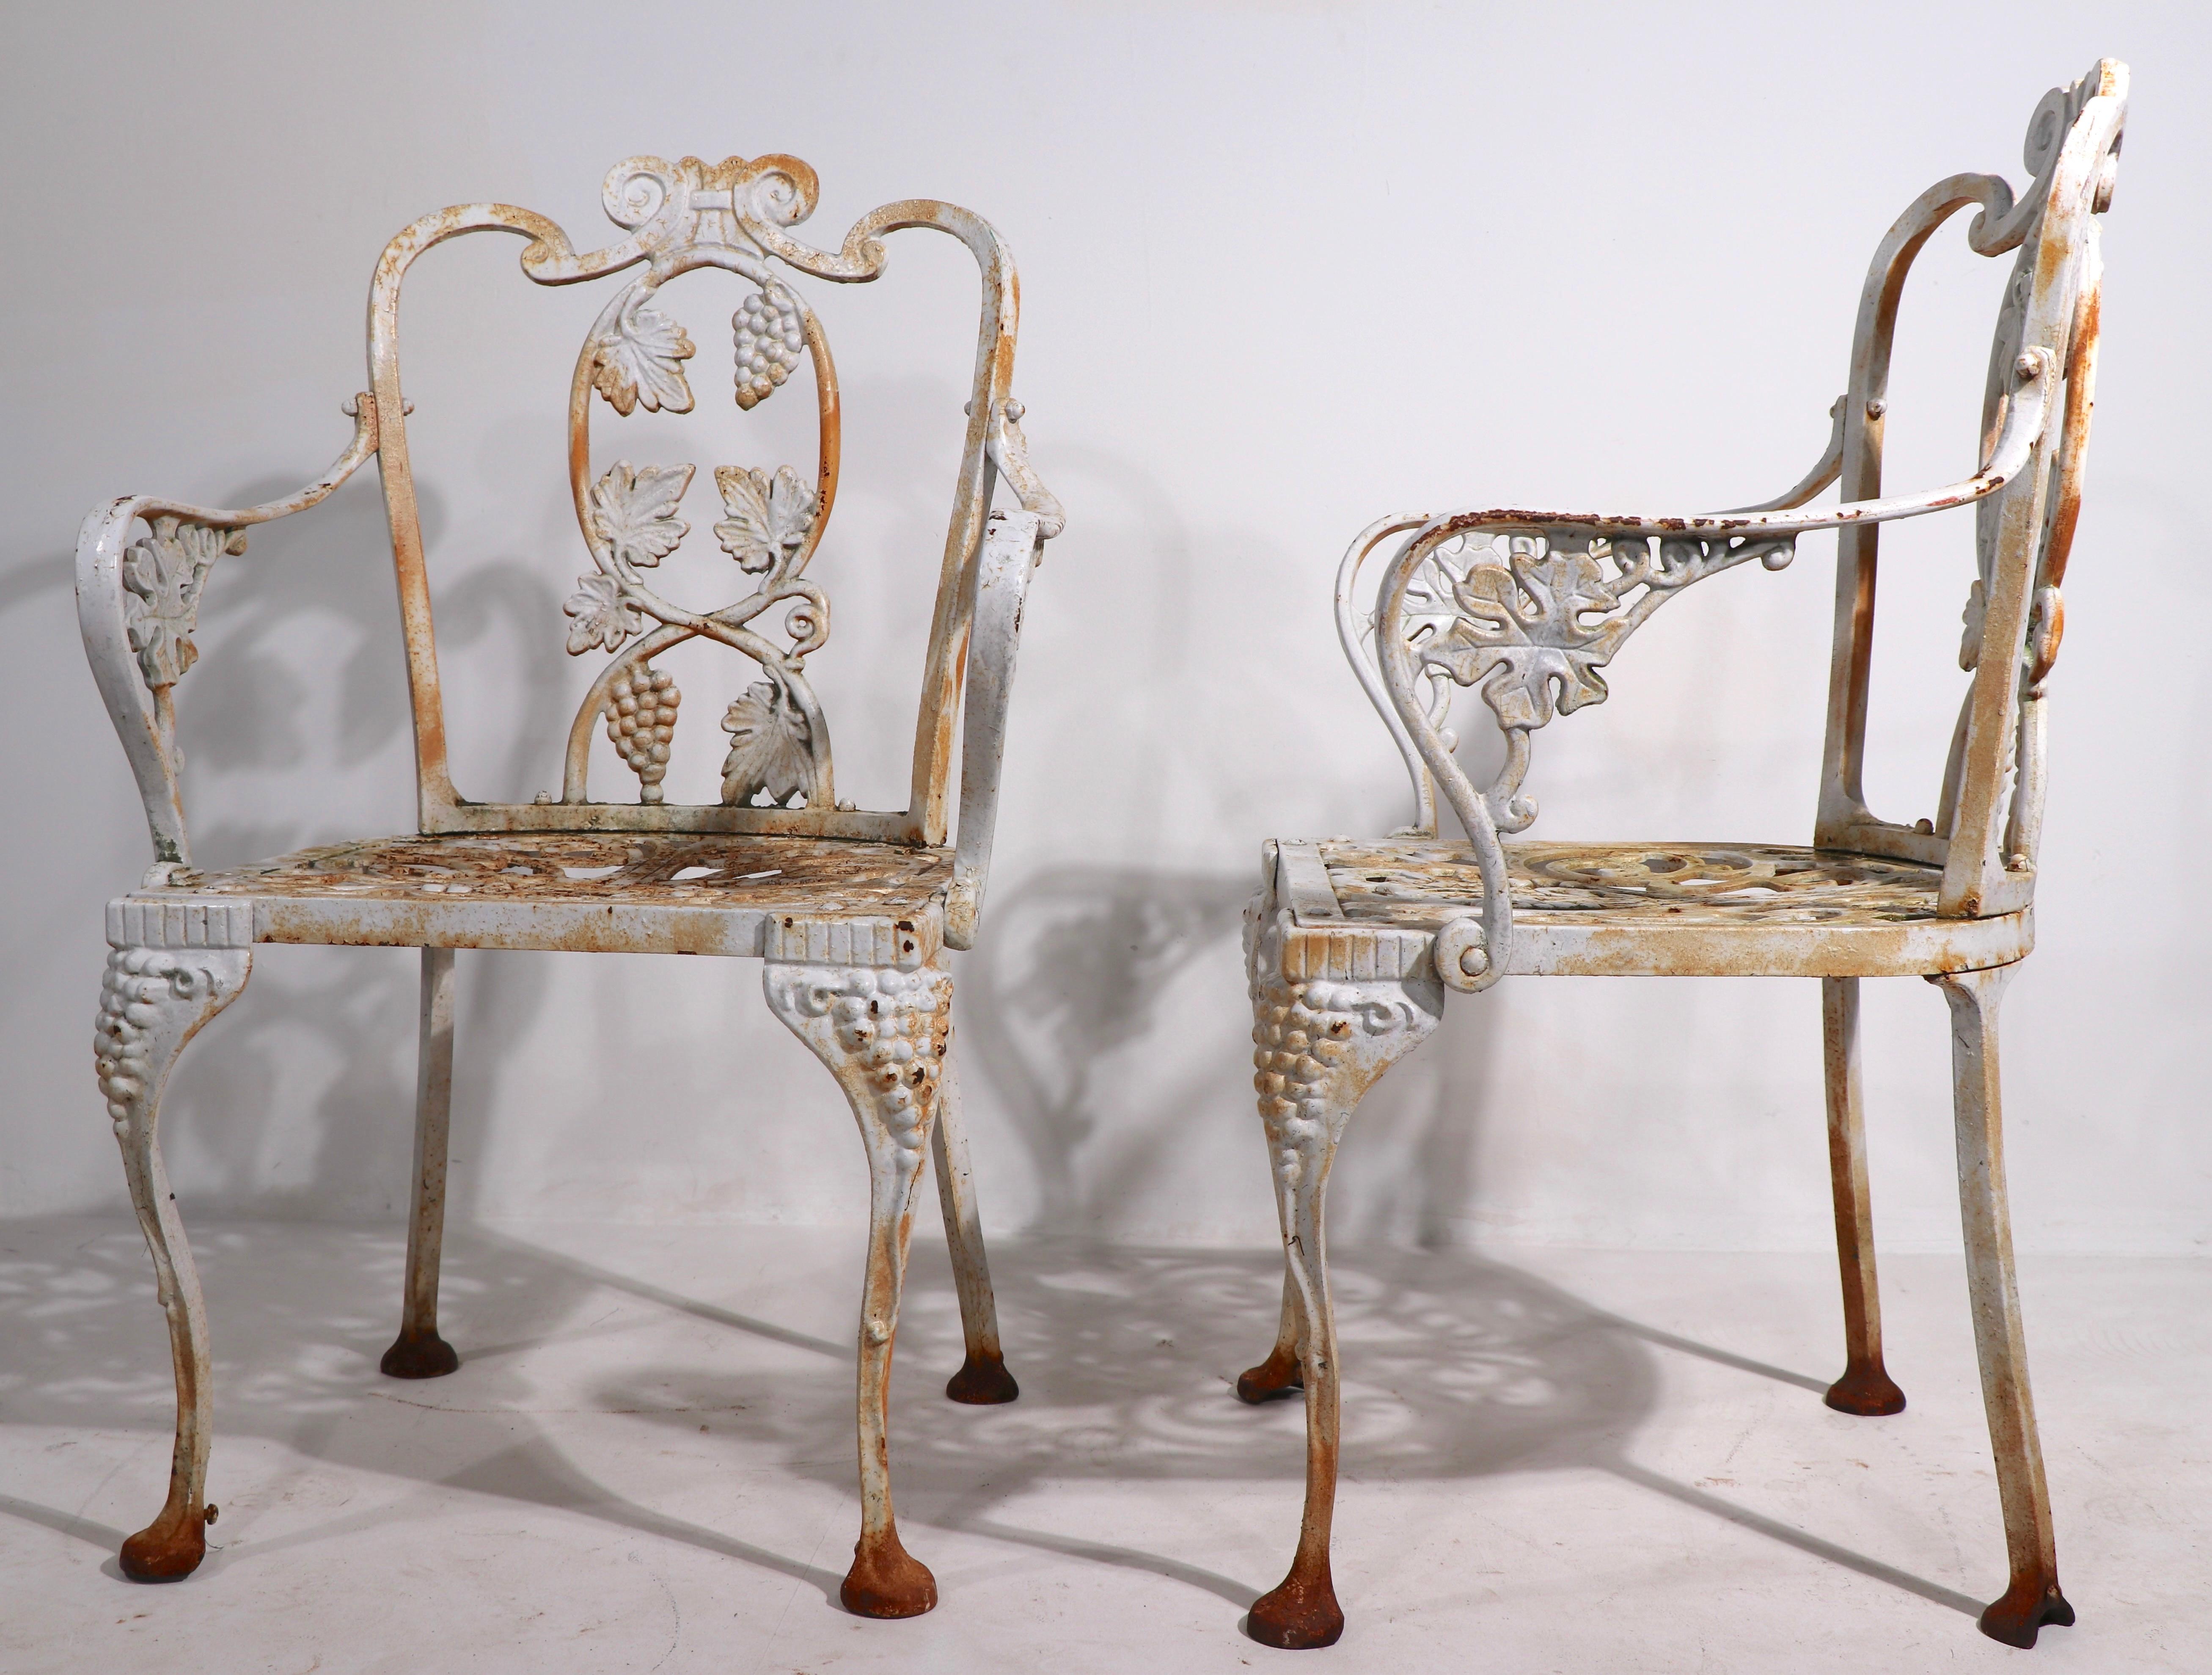 Ornate pair of cast iron garden chairs by Atlanta Stove Works, 20th century vintage in the 19th century style. Both are in very good condition, showing cosmetic wear to finish normal and consistent with age. Offered and priced as a pair. 
       